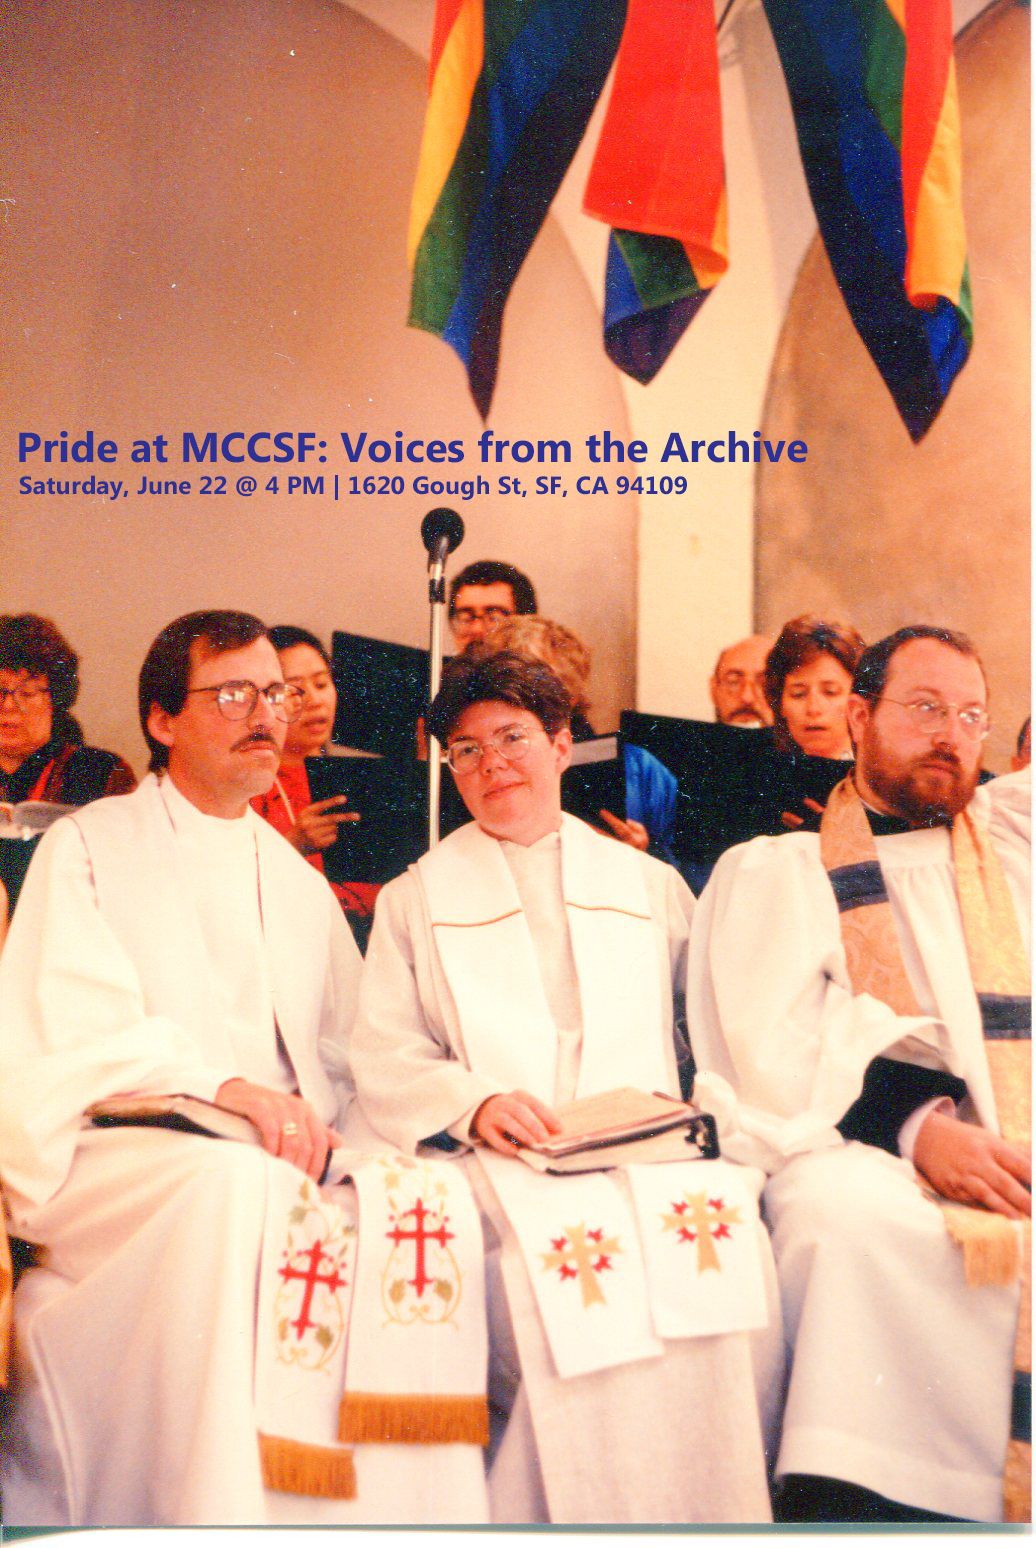 Pride at MCCSF: Voices from the Archive